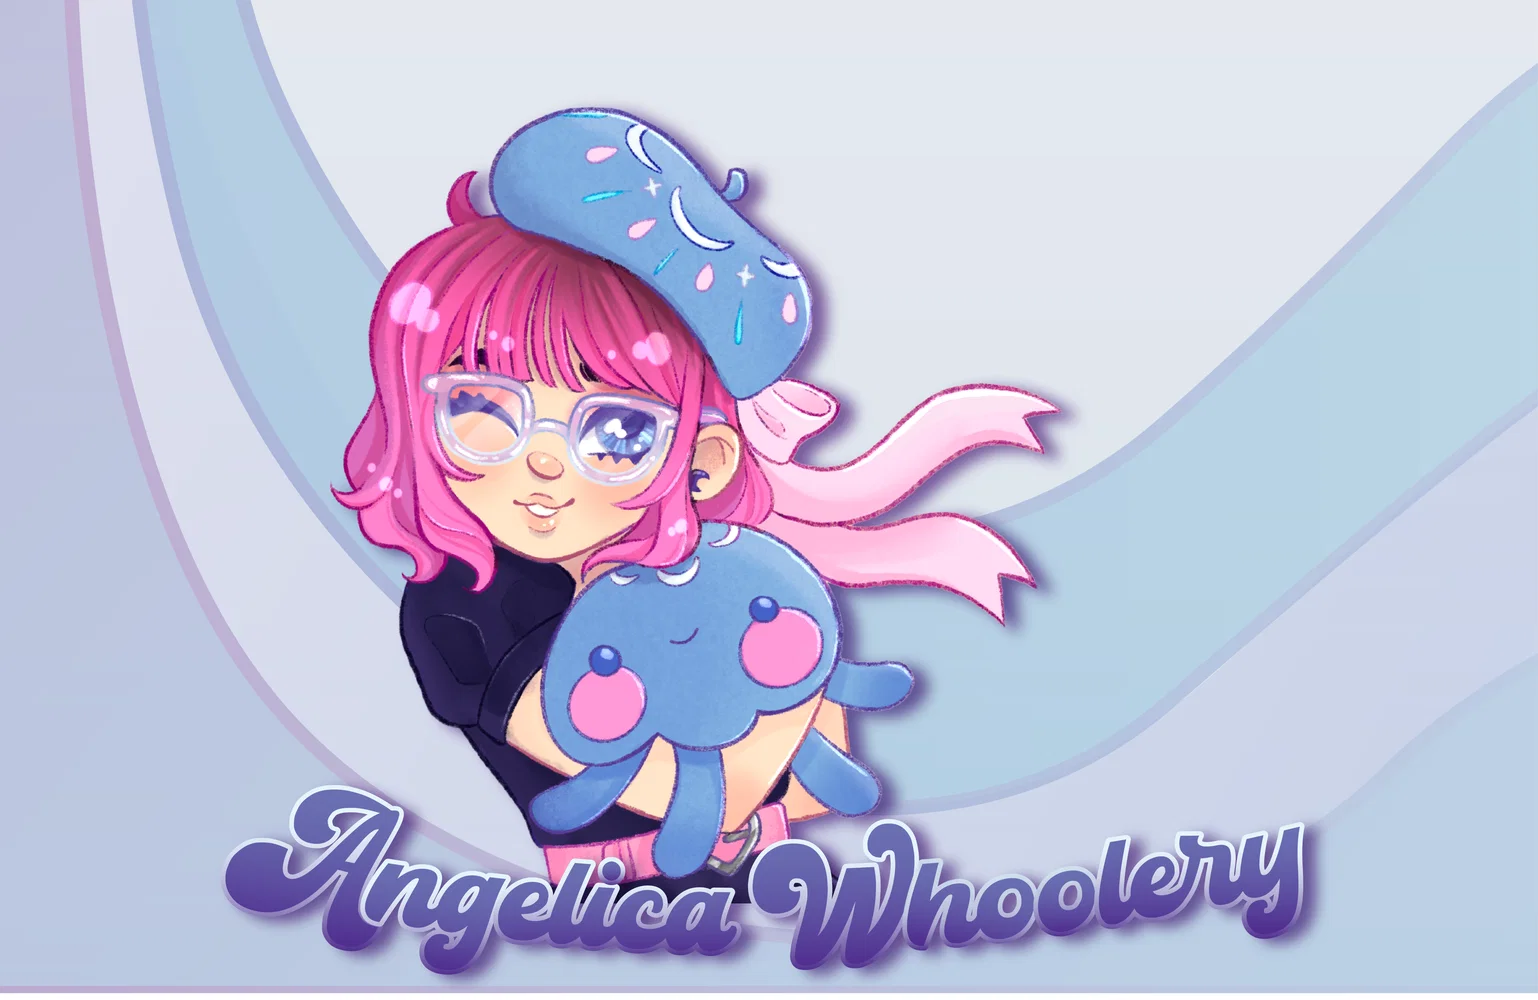 Self portrait of a woman with short, pink hair, holding a plush jelyfish.